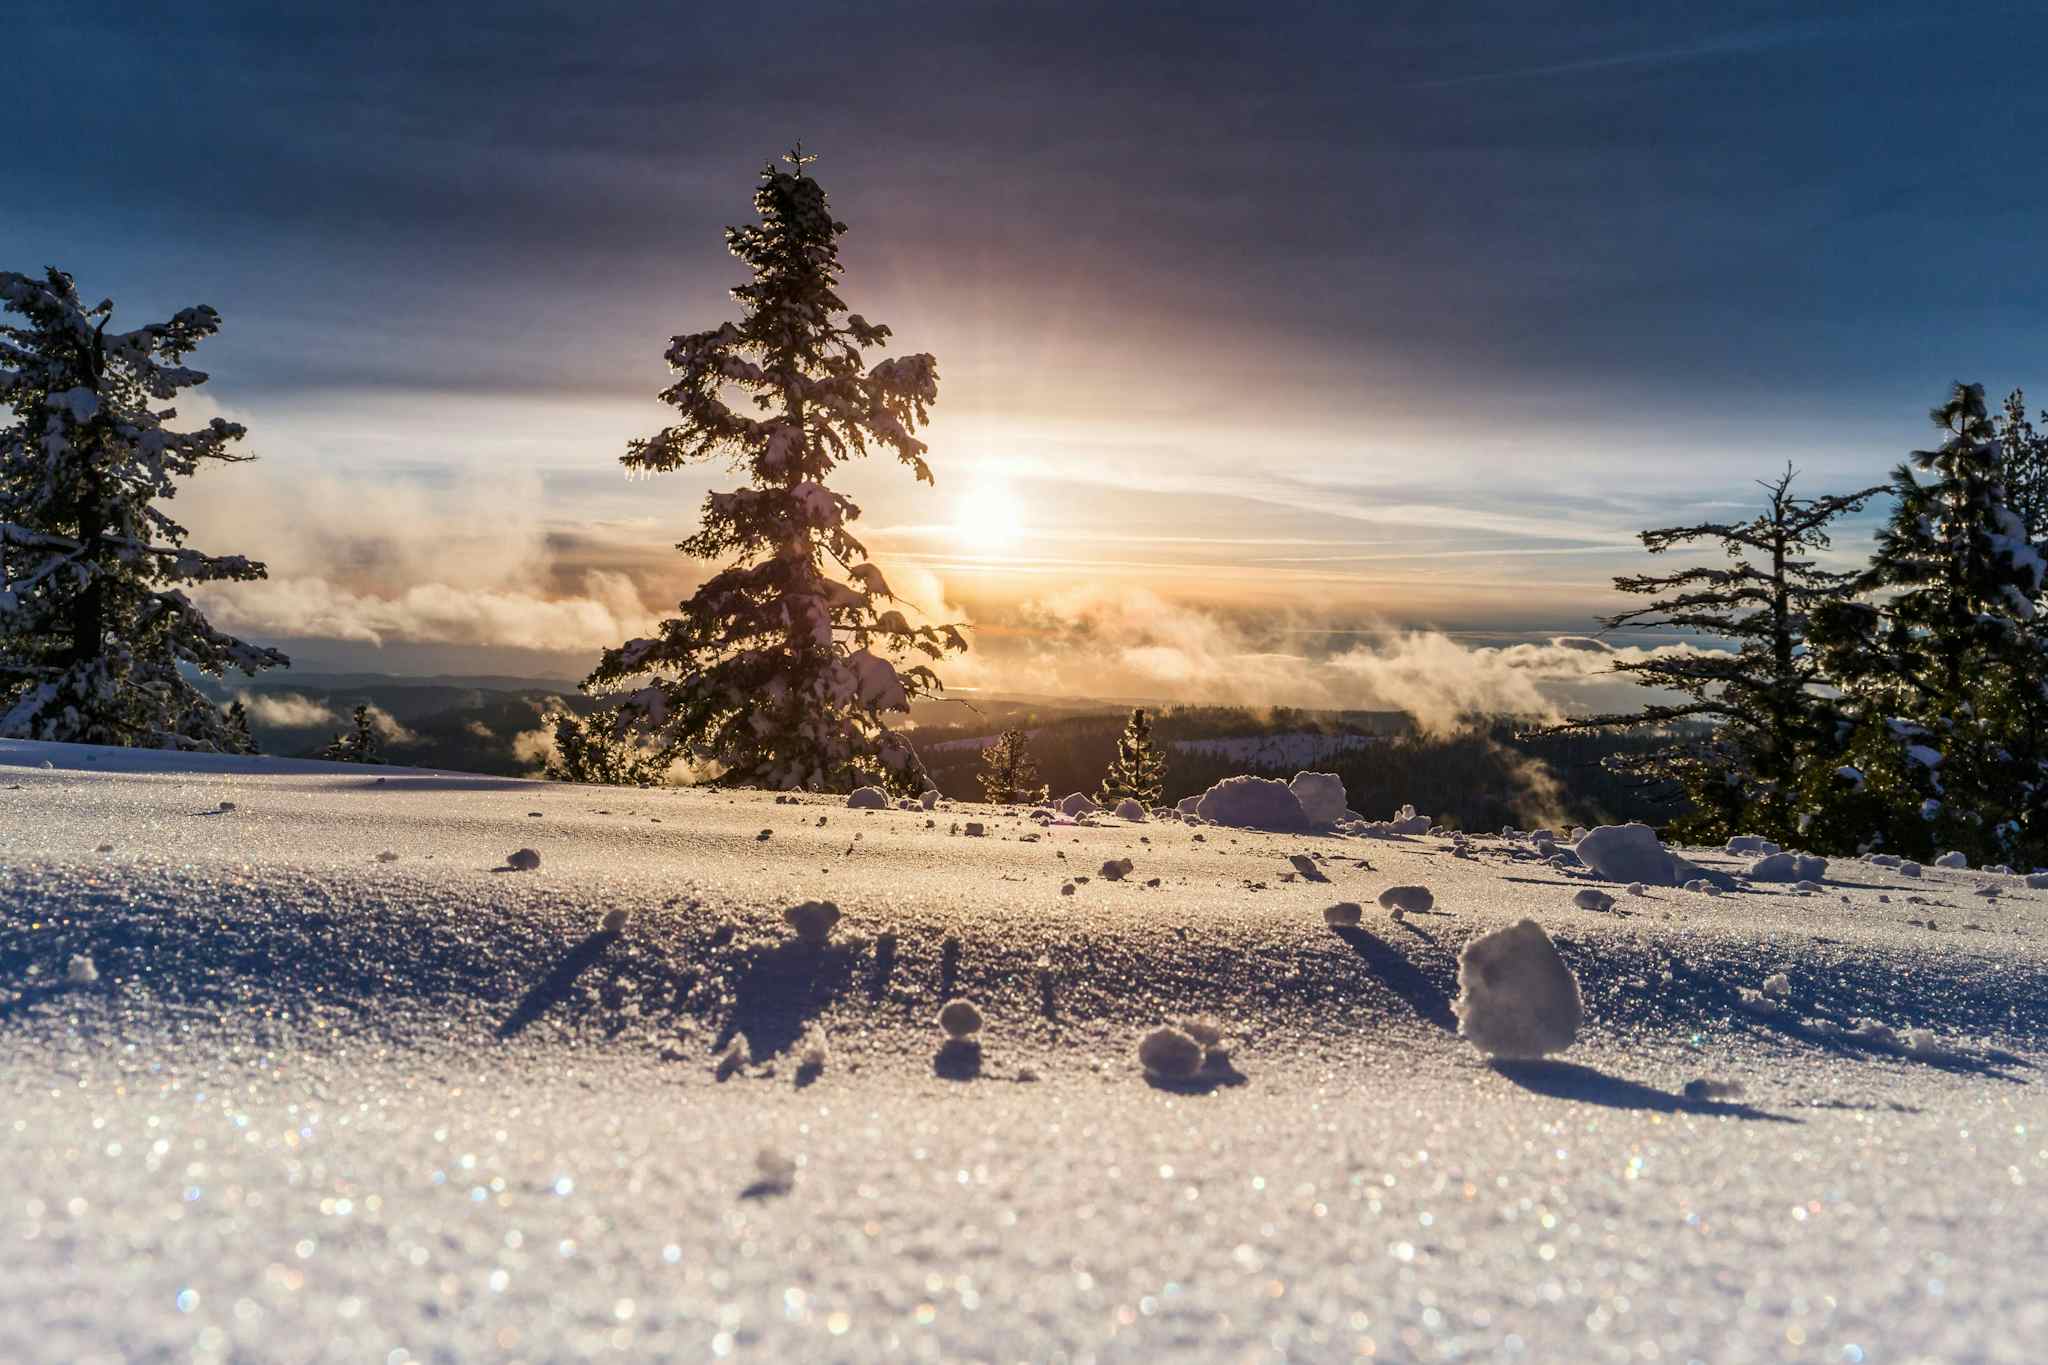 View of snow-covered ground, trees and sunset in the Dolomites in winter, Italy.